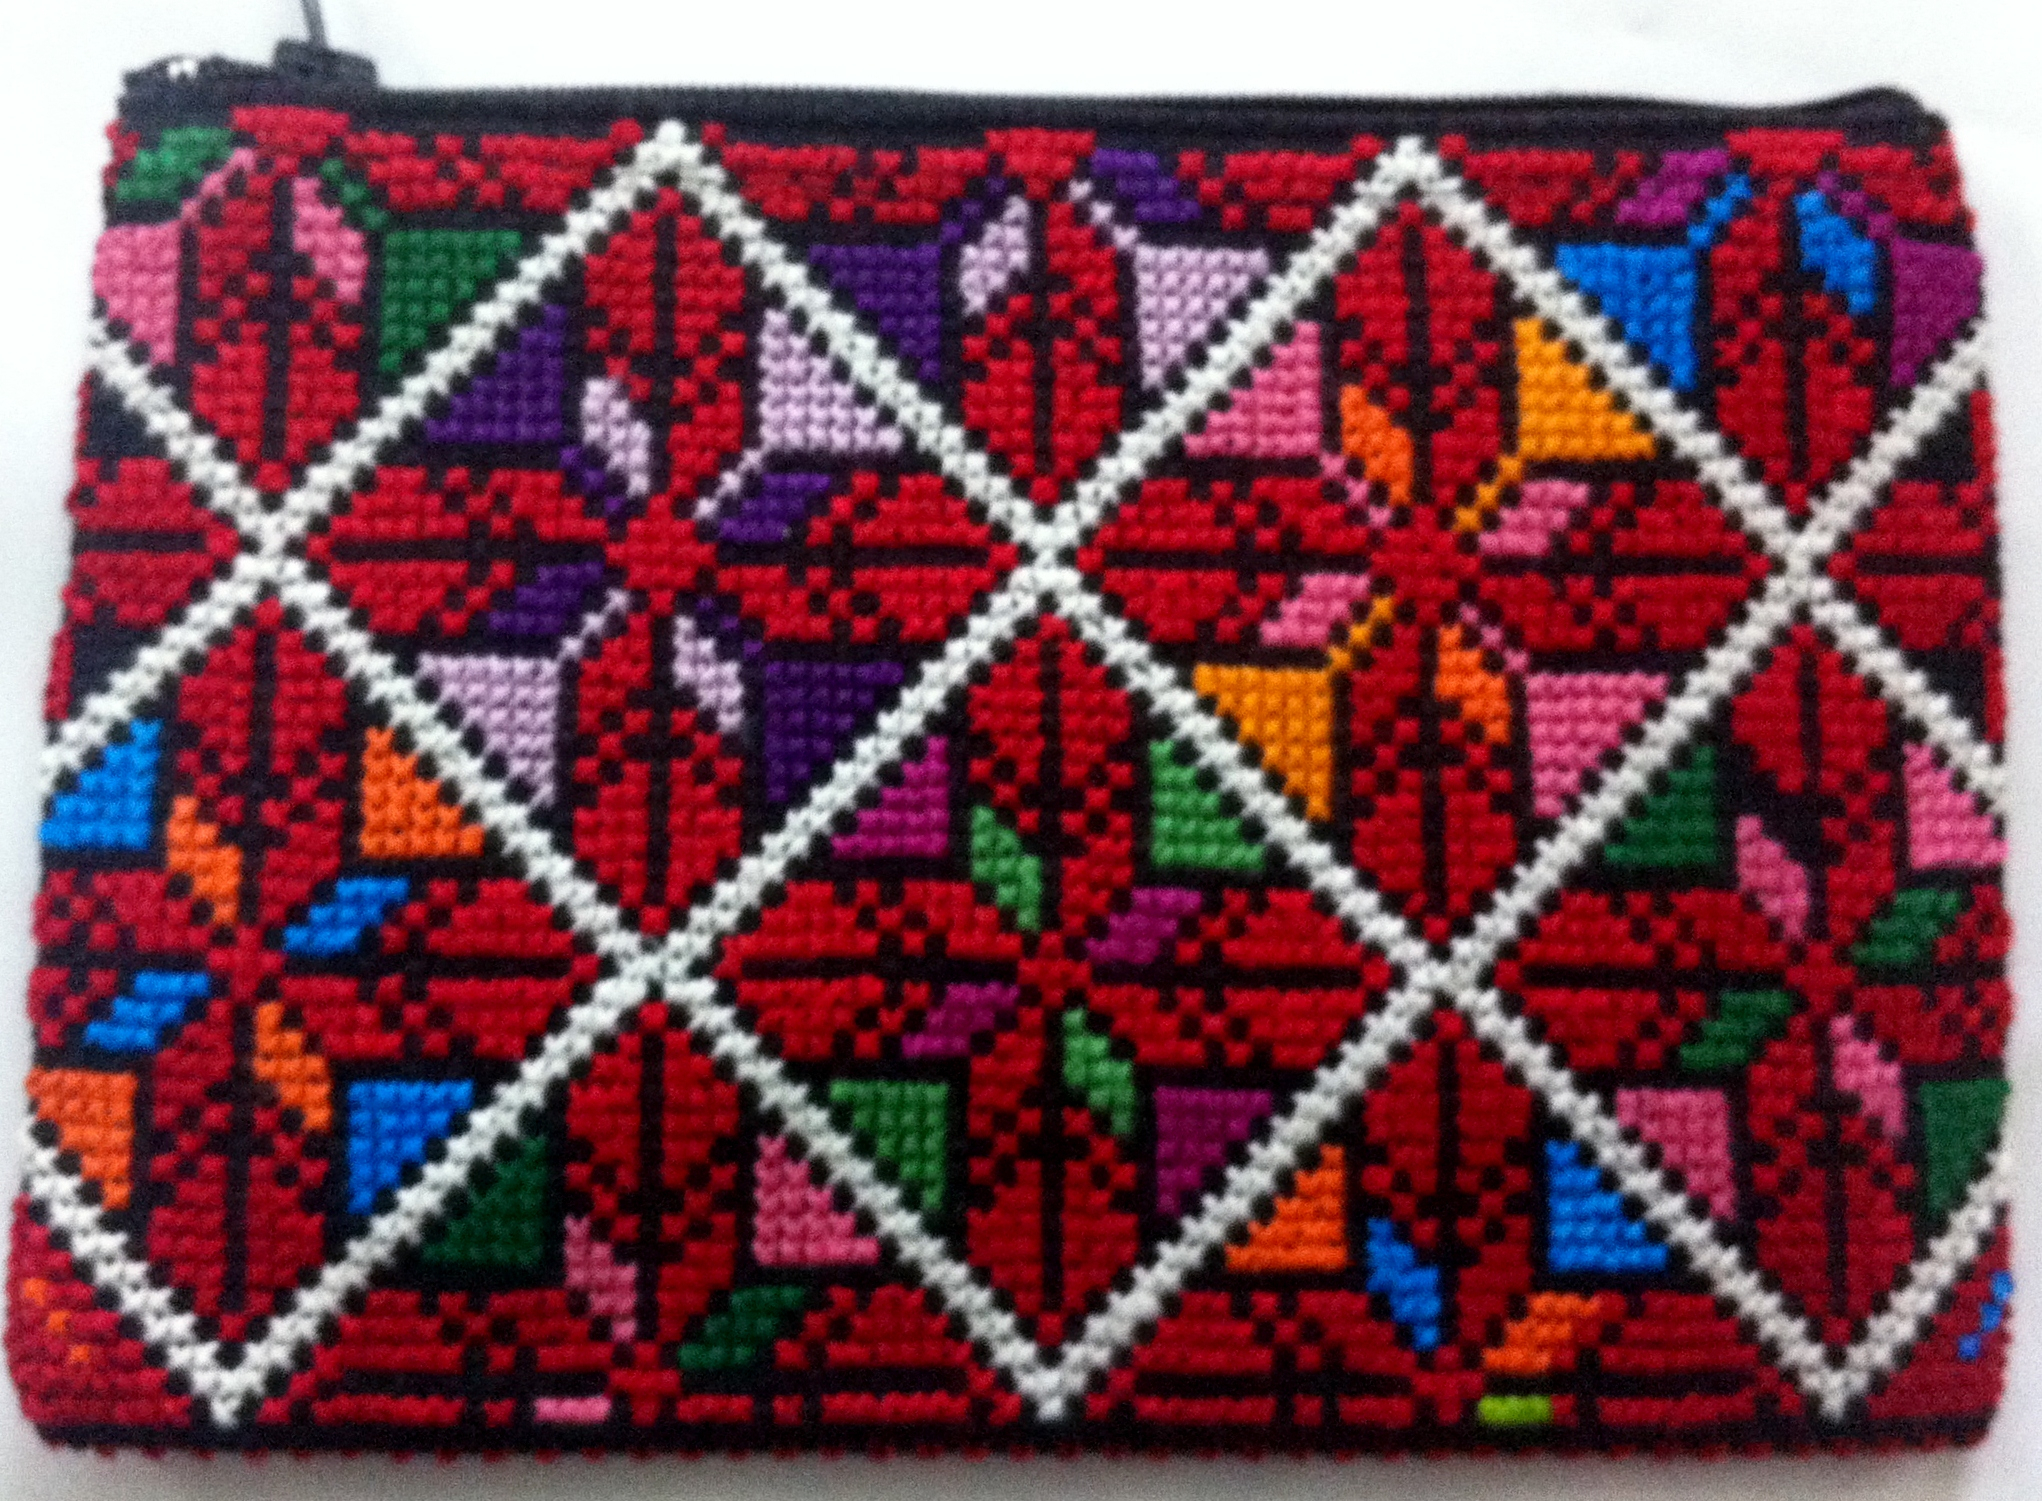 Palestinian Embroidery Patterns Palestinian Cross Stitch Embroidery Wallet And Purses Collection